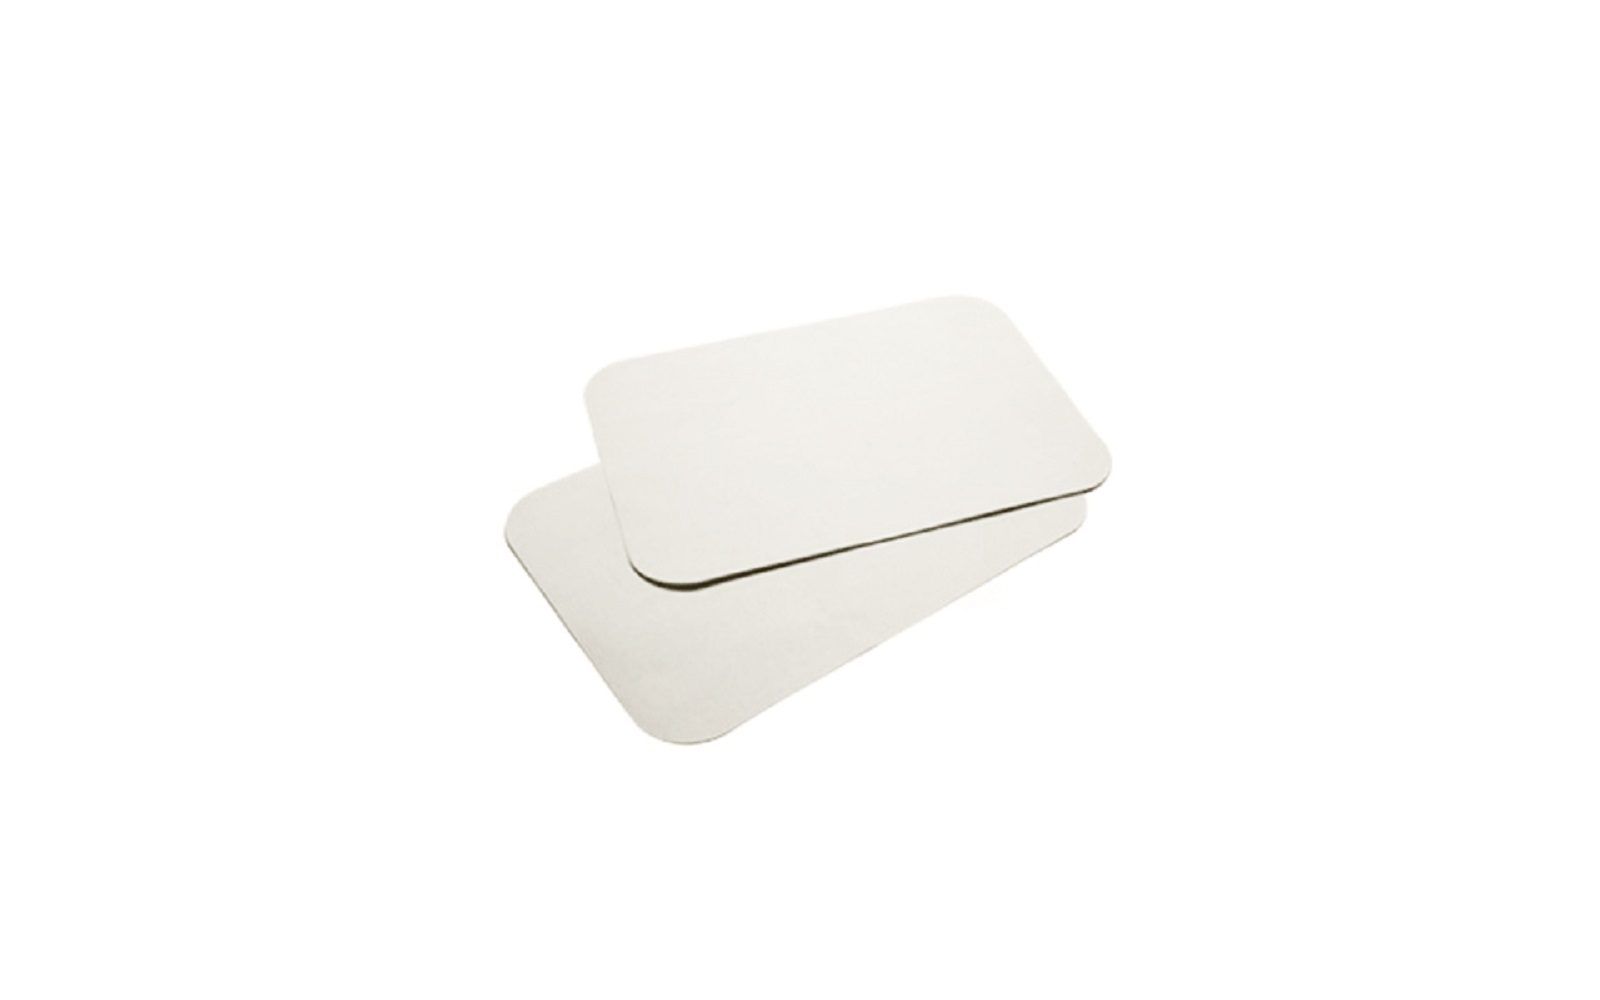 House brand 8-1/2" x 12-1/4" white ritter "b" paper tray cover, box of 1000